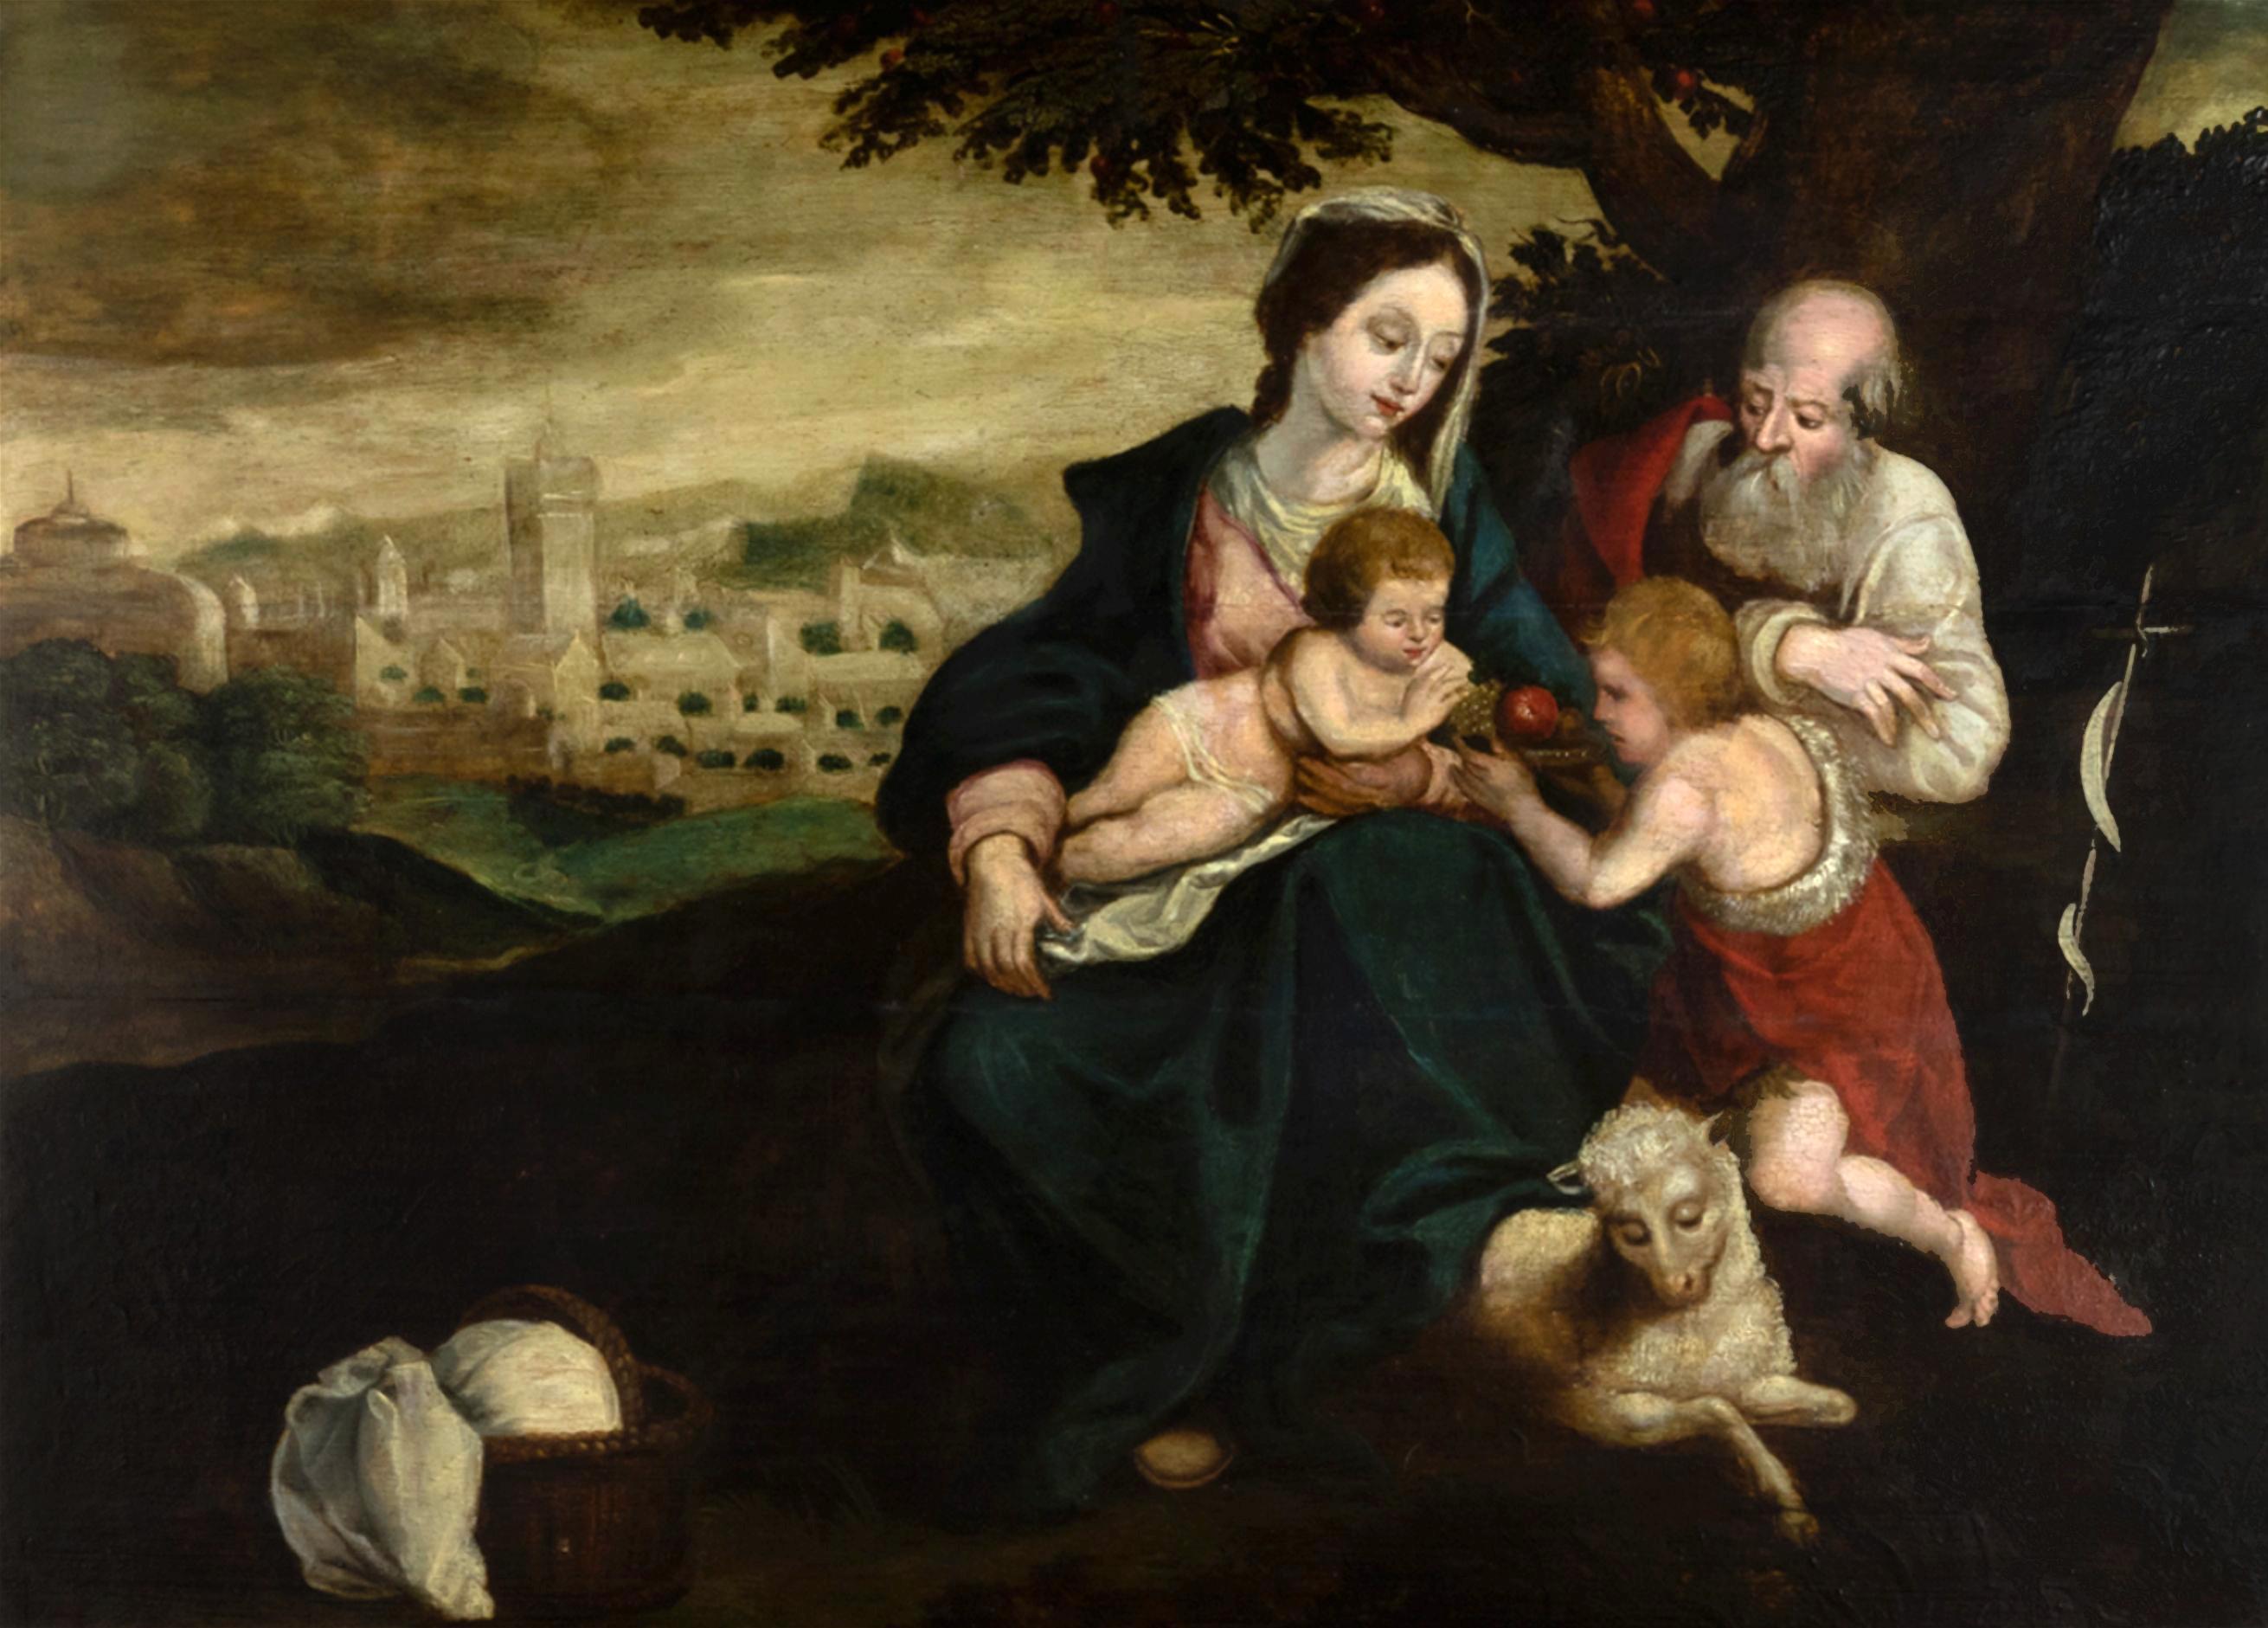 Oiled The Holy Family And Saint John The Baptist Painting 17th Century Religious Art For Sale